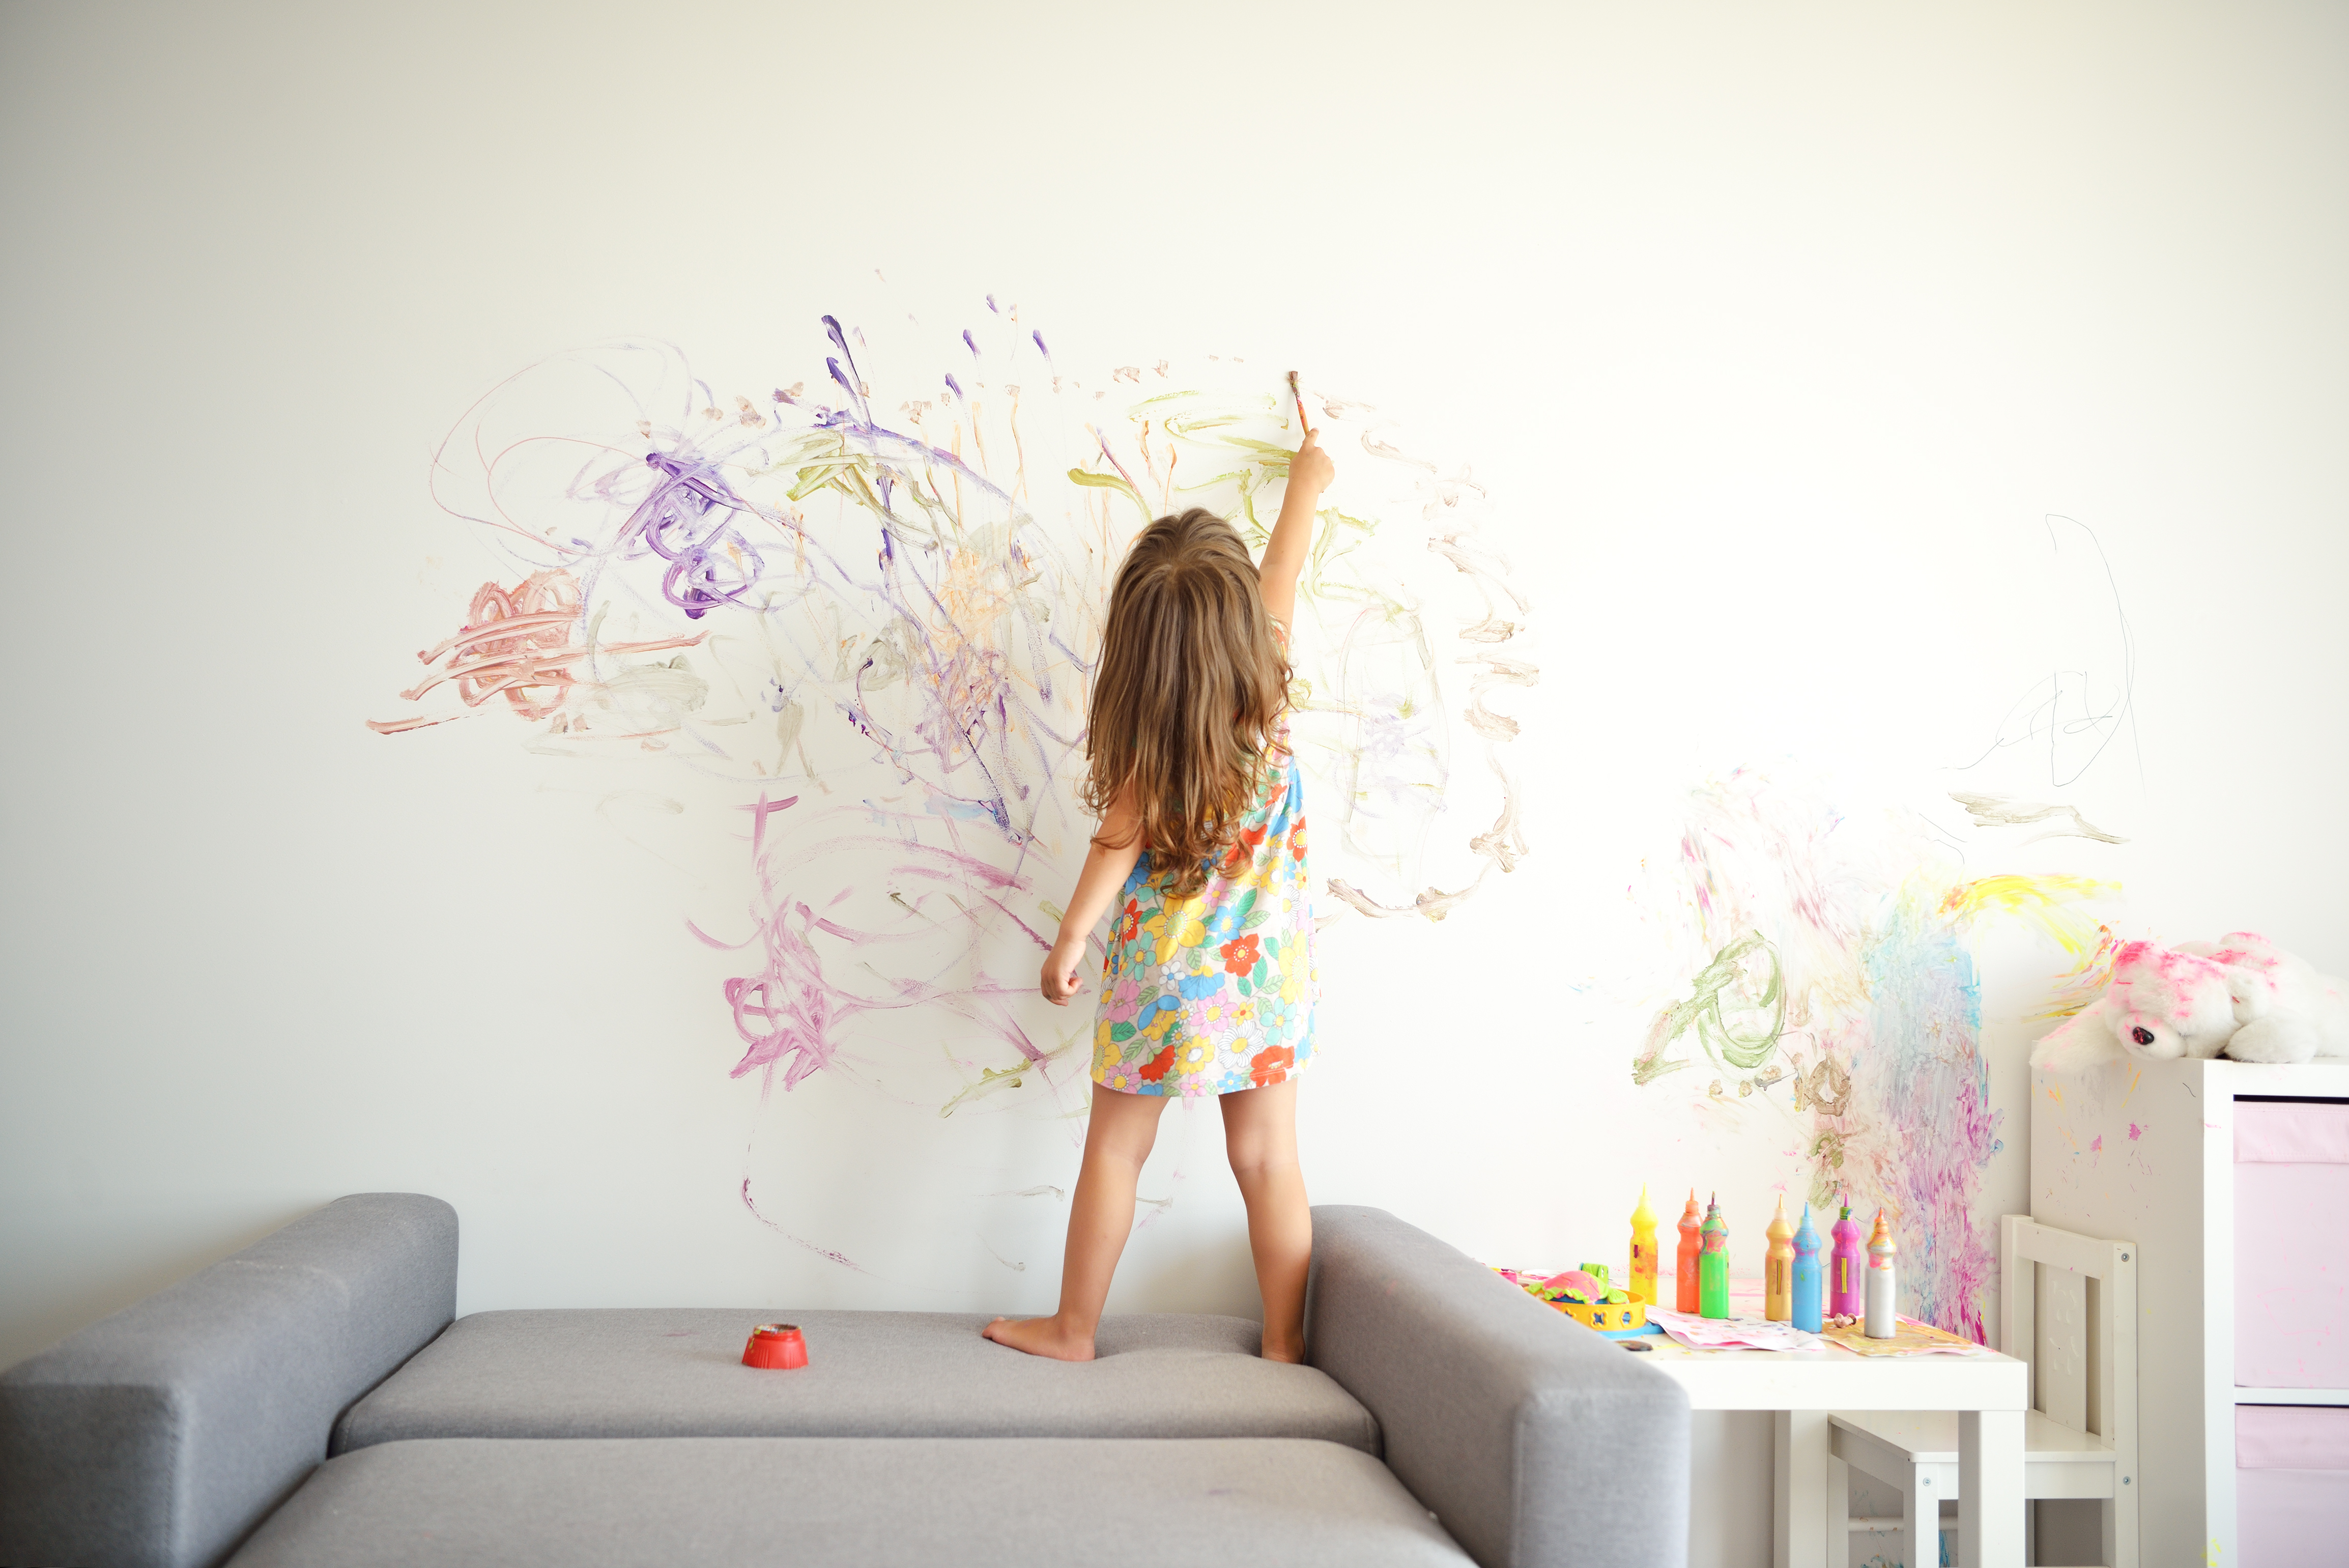 A little girl drawing on the walls | Source: Shutterstock